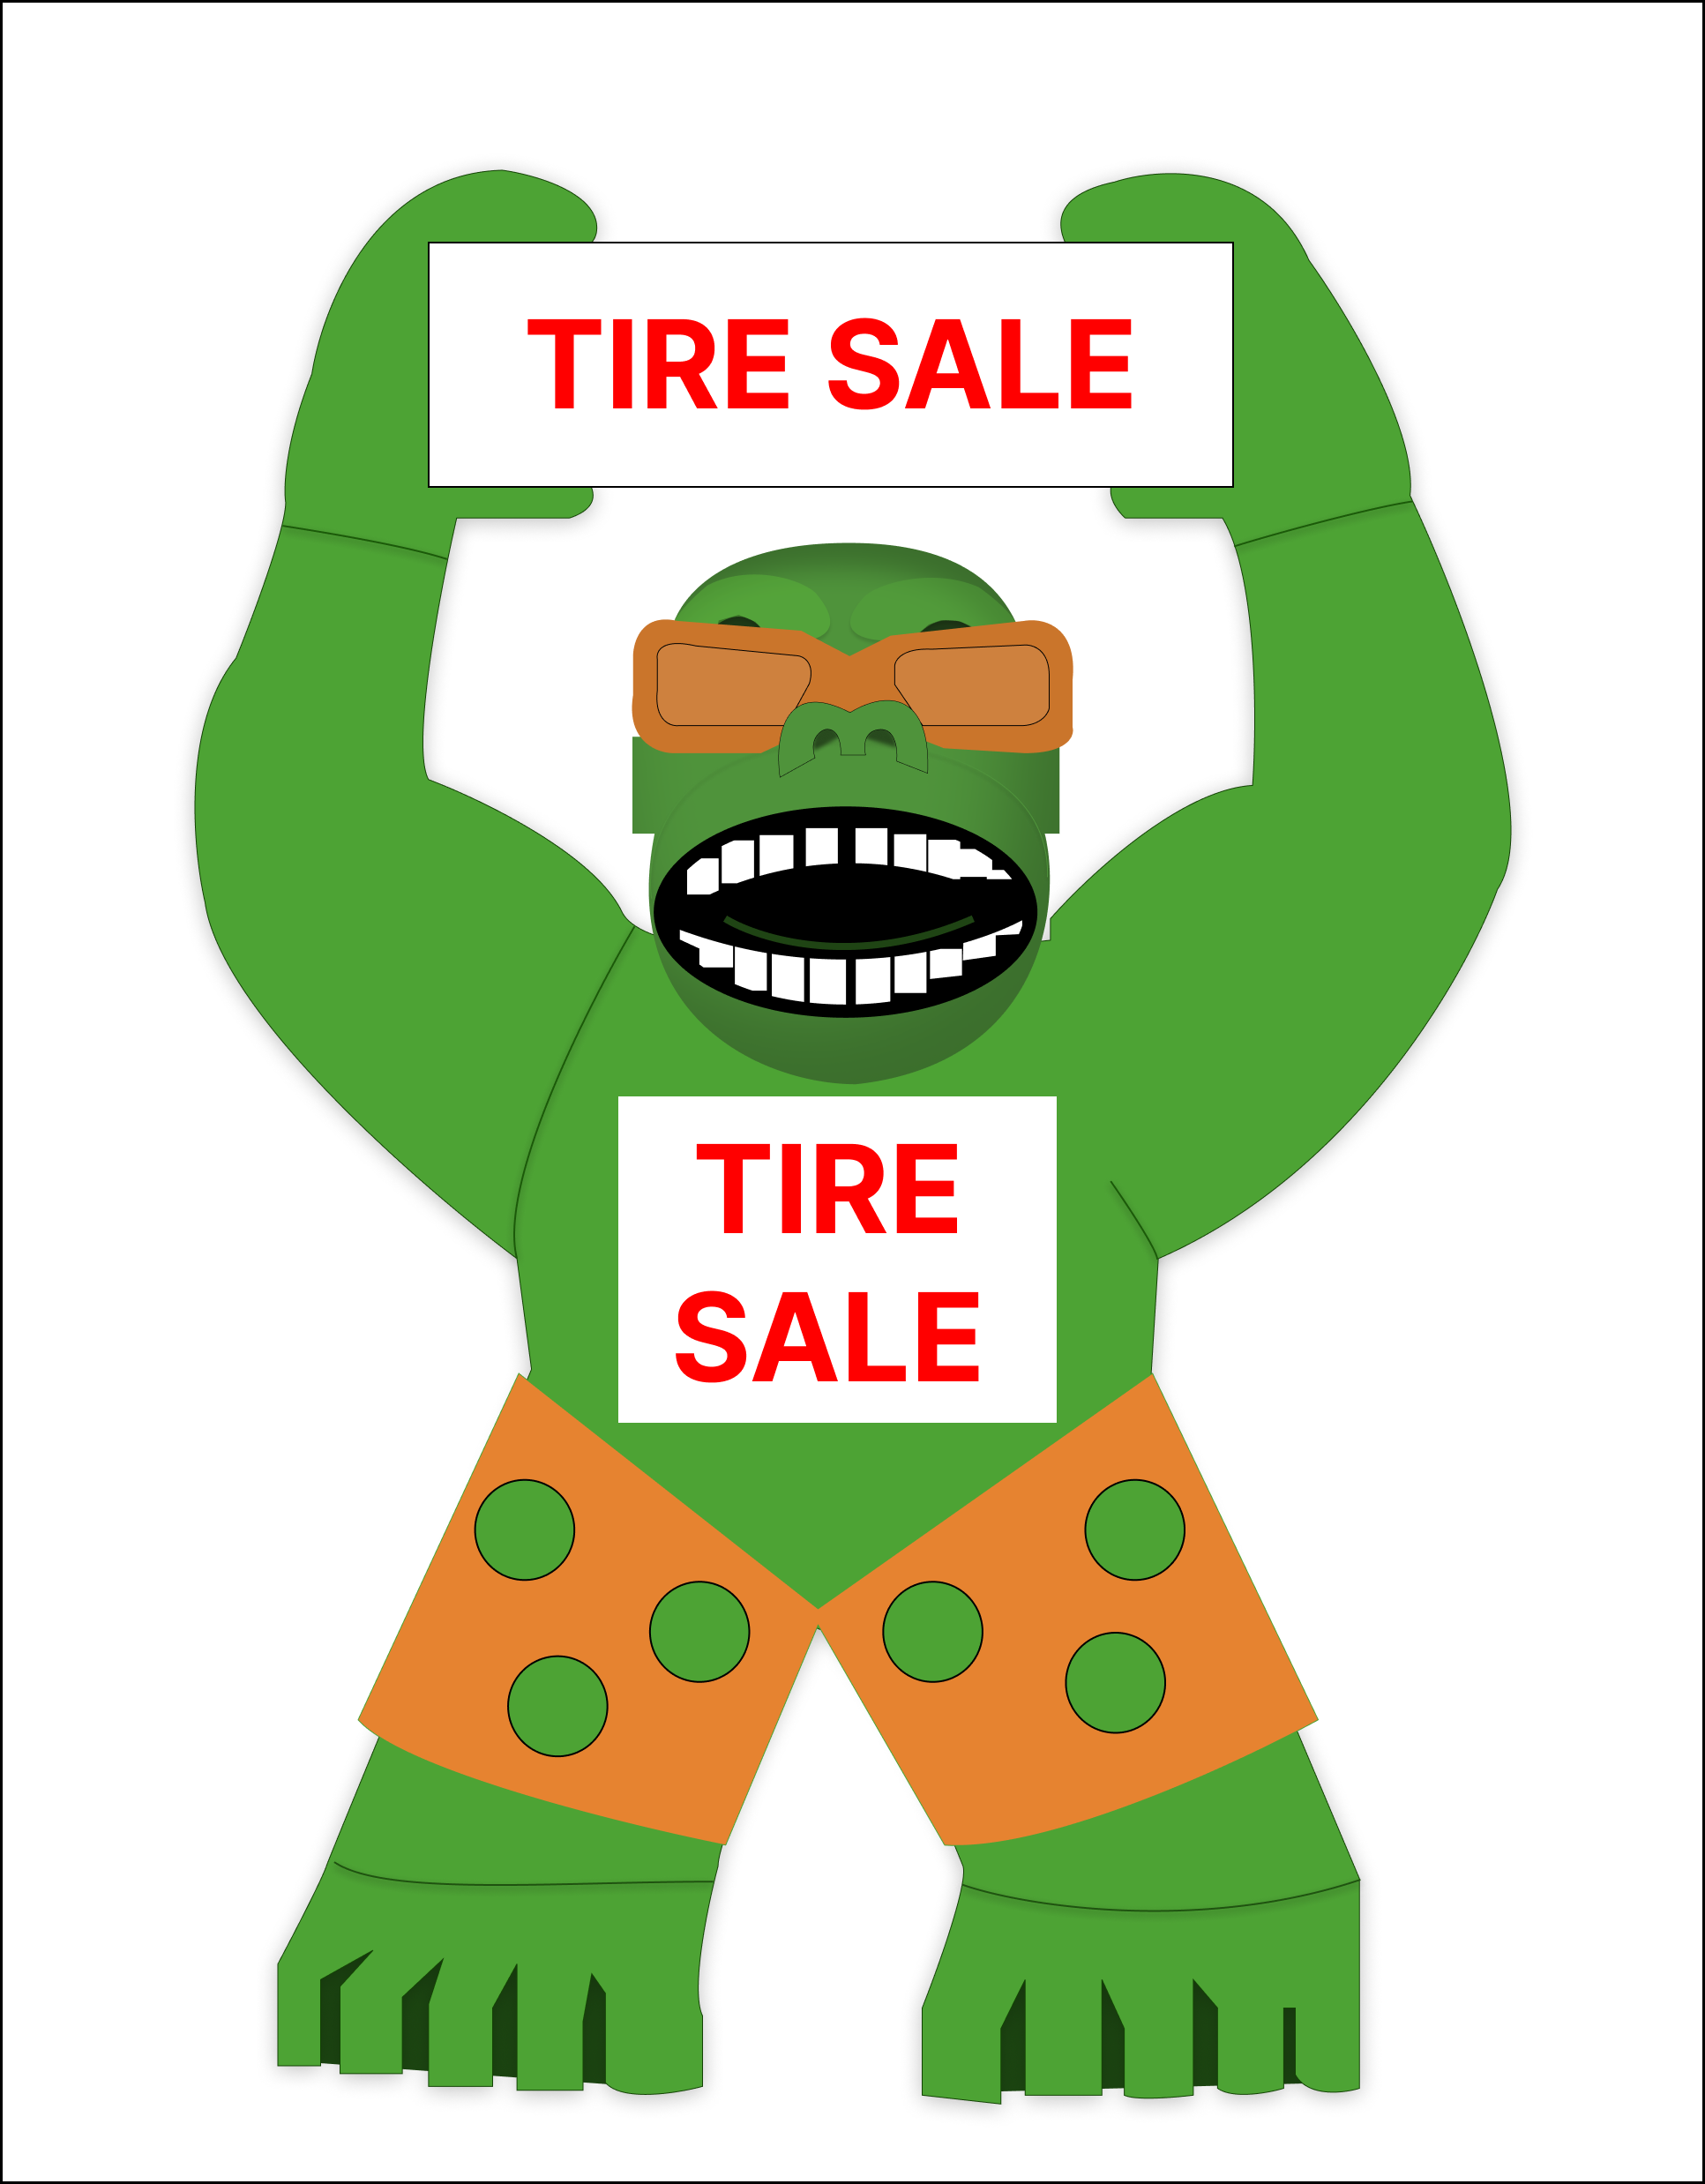 22 ft TIRE Sale GIANT Inflatable Gorilla